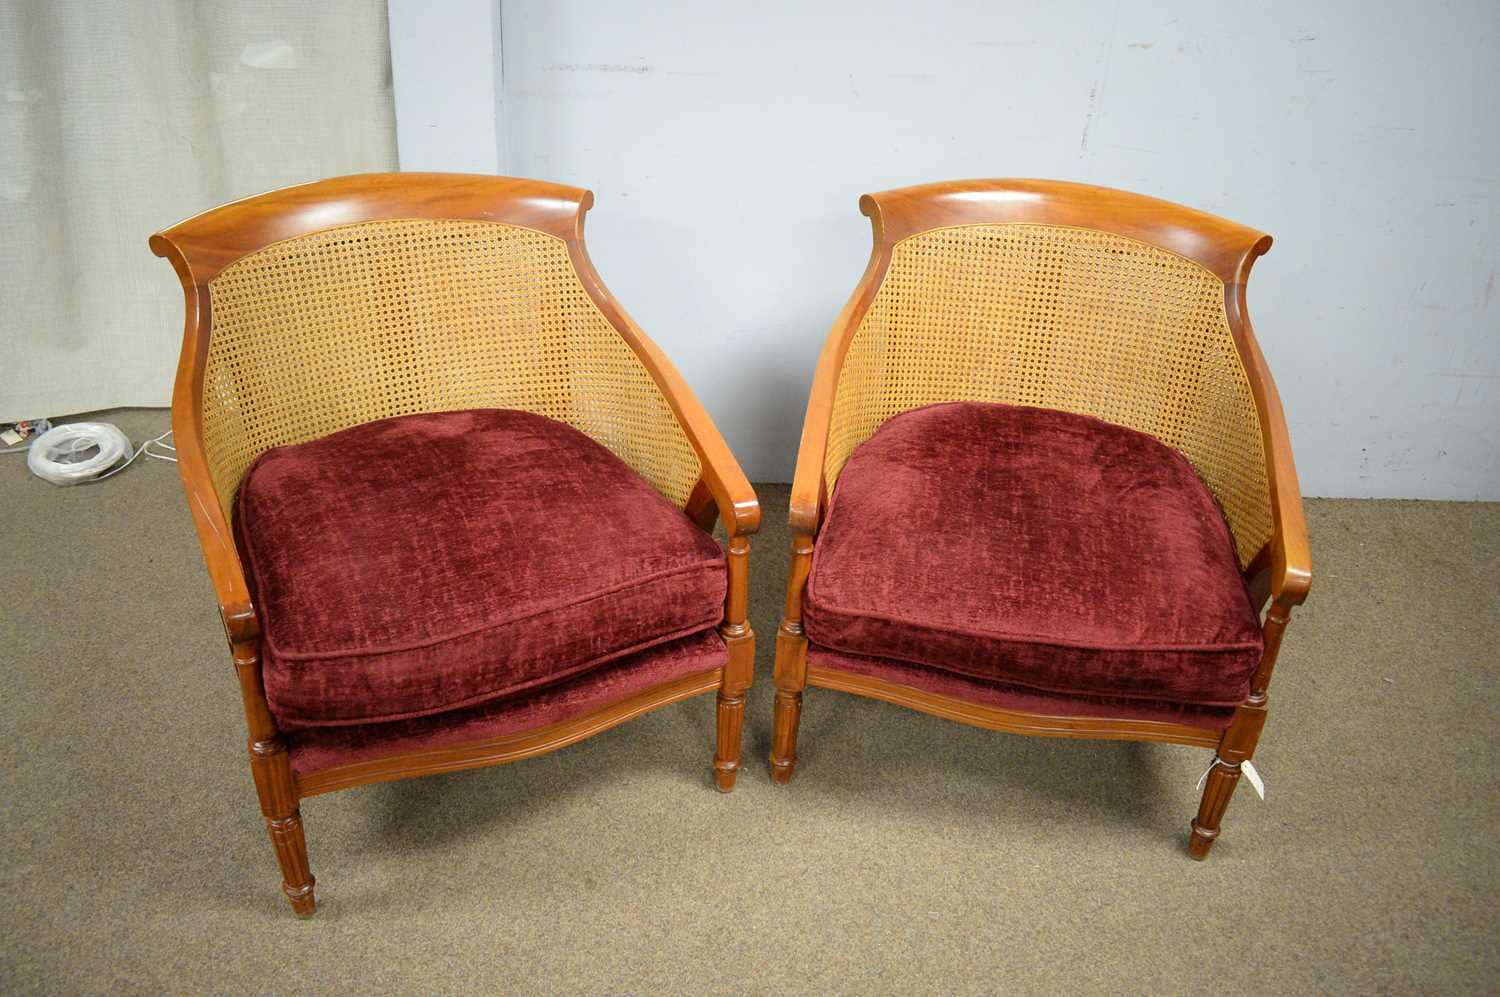 Modern mahogany Bergere sofa and two armchairs. - Image 4 of 5